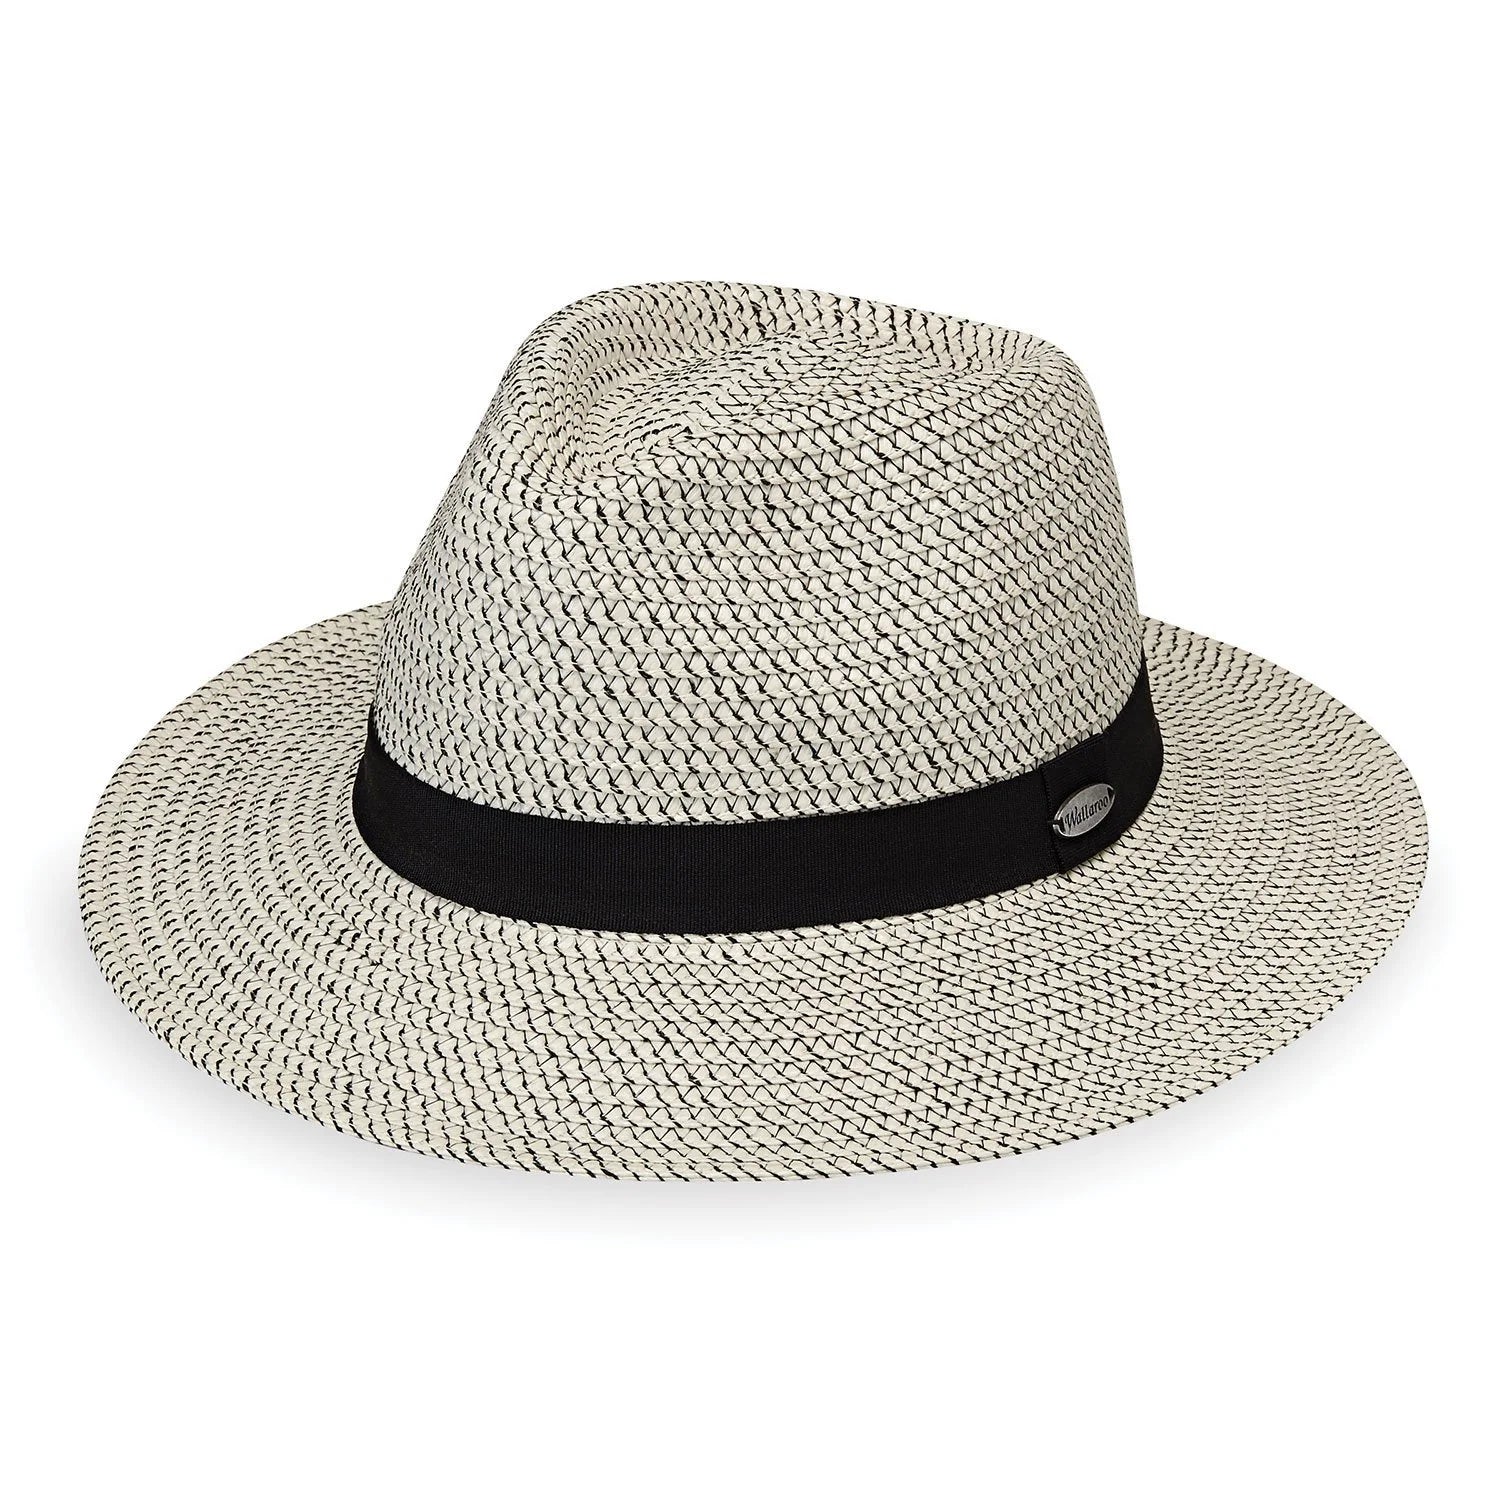 Sophisticated structure and contrast stitching come together in perfect harmony. The Charlie fedora hat looks great when sailing or walking along the water. The neutral tones add a light and airy feel to any outfit, and its packable nature allows this hat to be taken on any adventure.&nbsp;